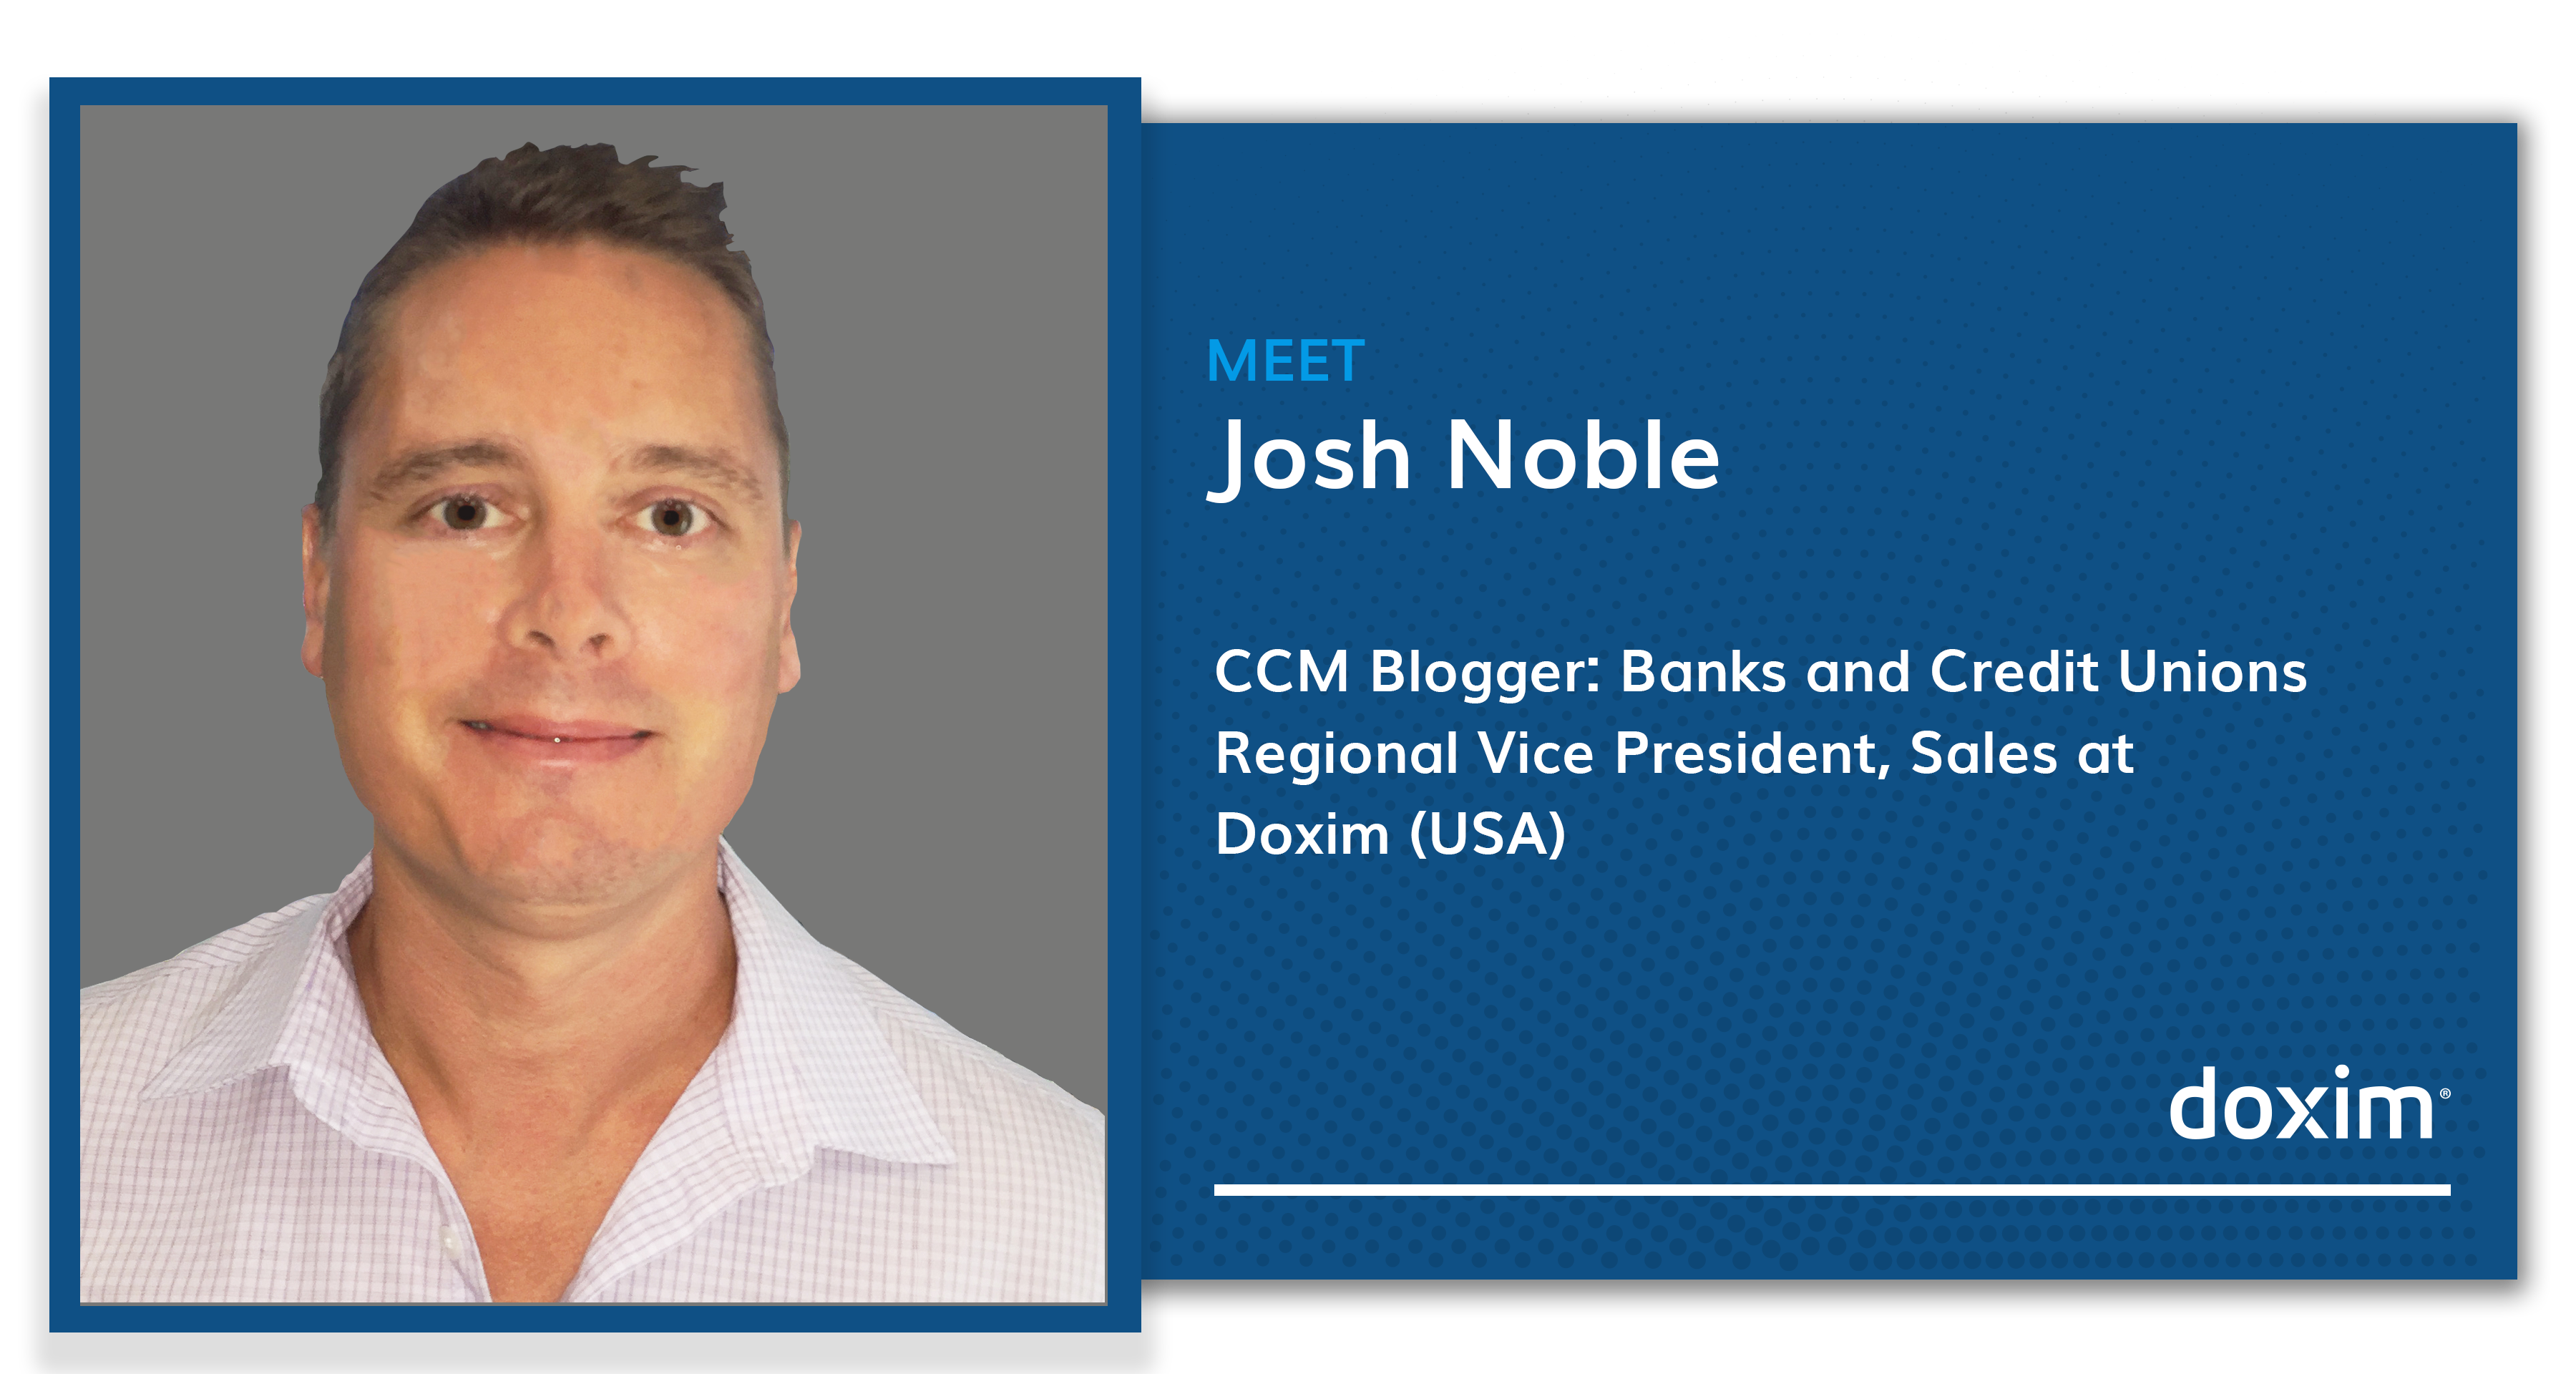 Josh Noble - CCM Blogger: Banks and Credit Unions regional Vice President, sales at Doxim (USA)